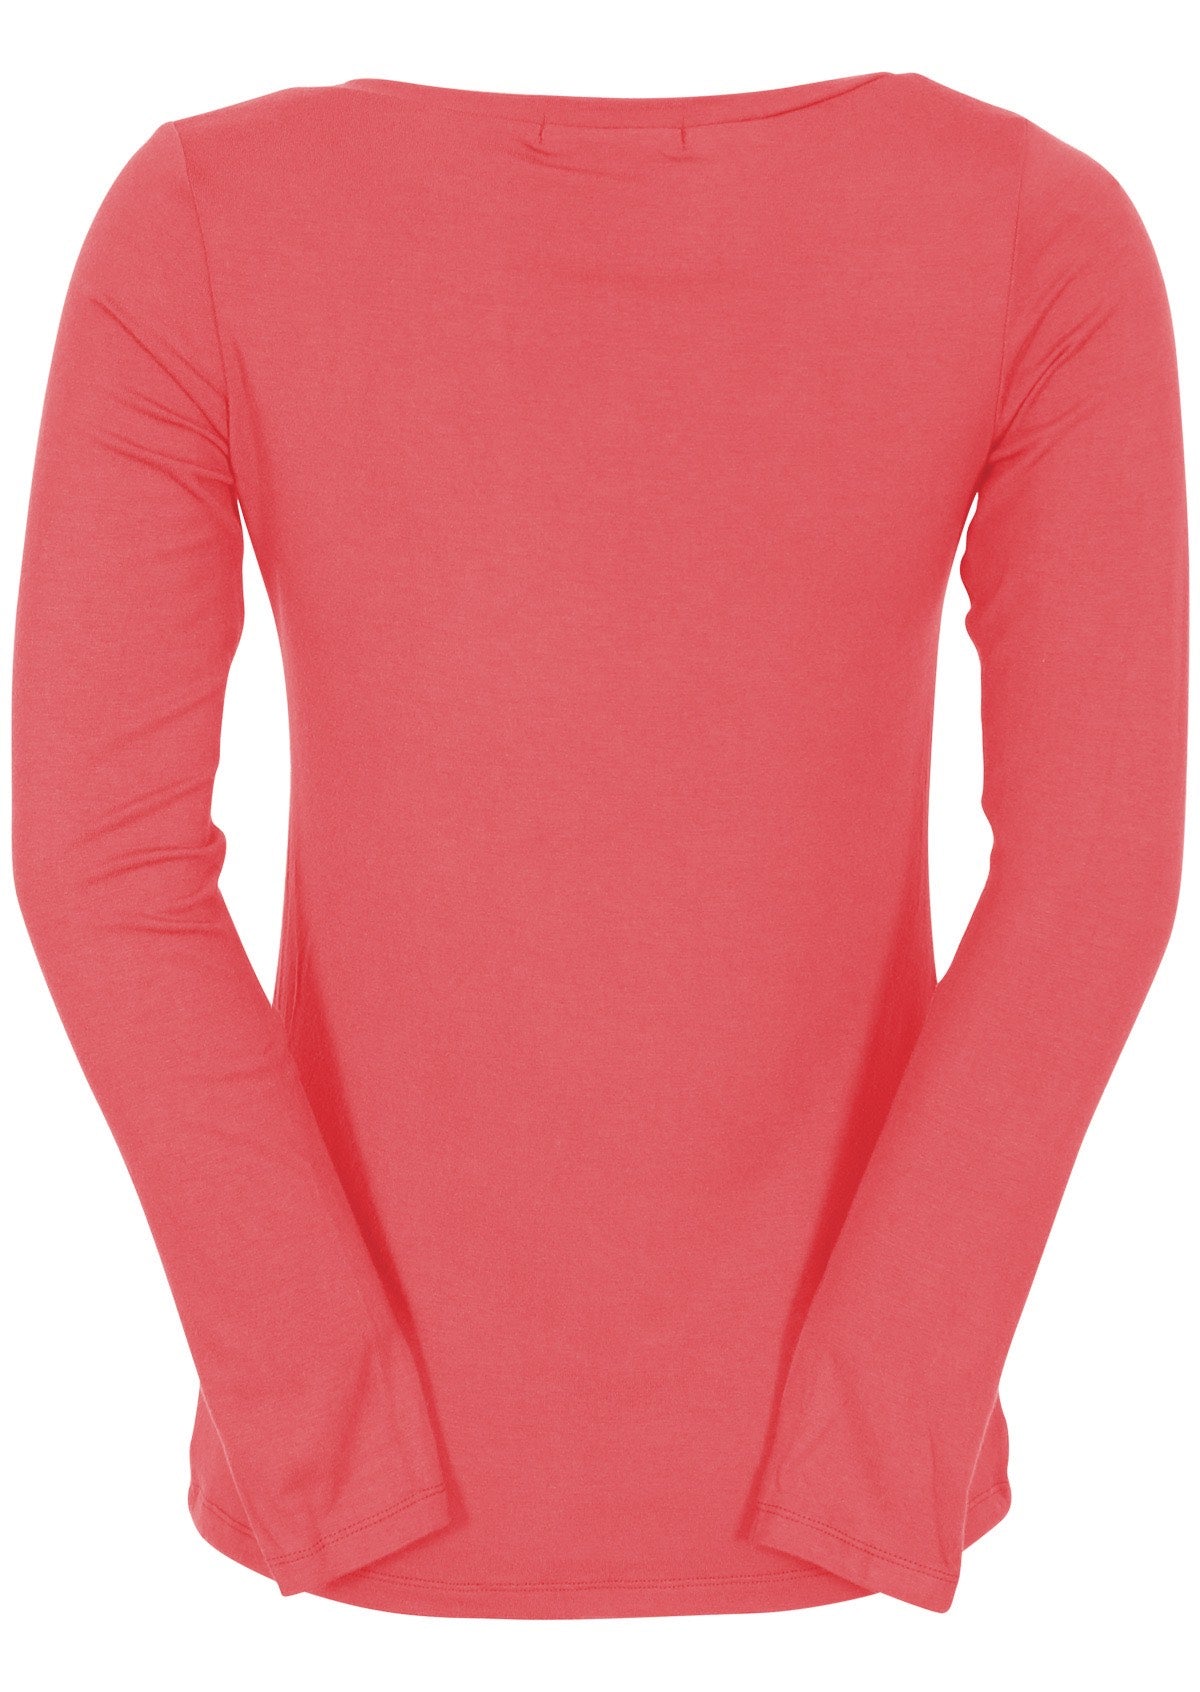 Back view of women's pink long sleeve stretch v-neck soft rayon top.